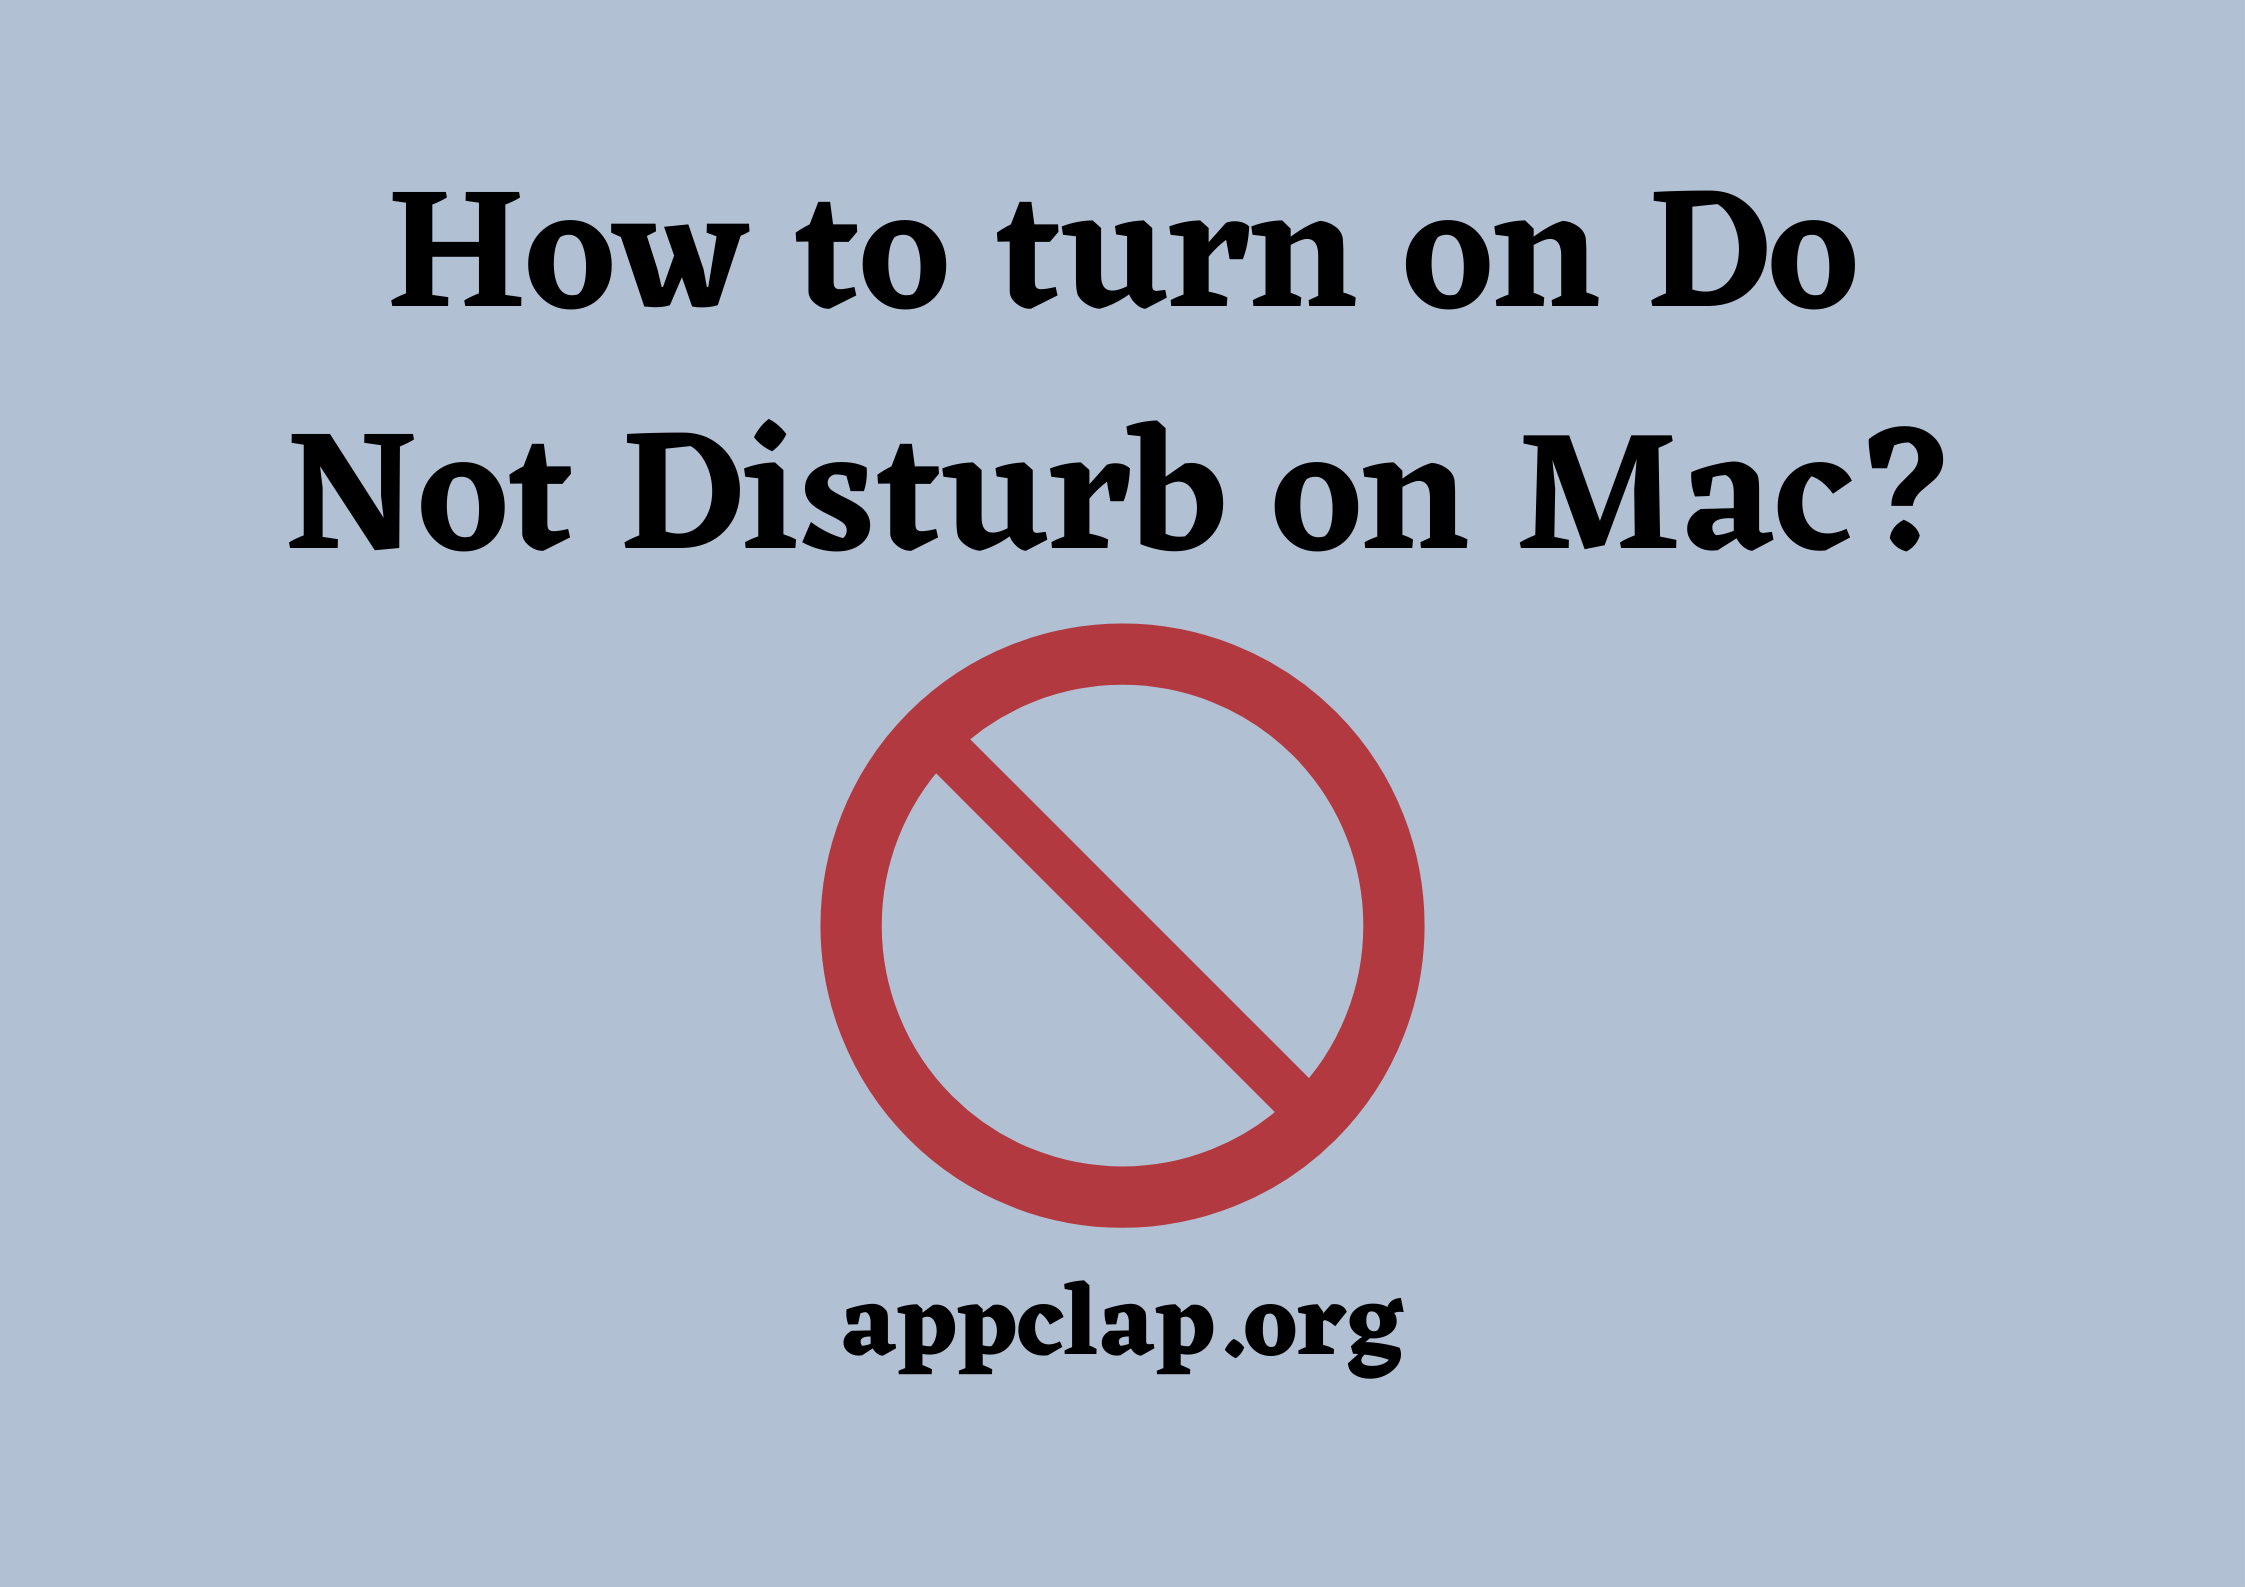 How to turn on Do Not Disturb on Mac?